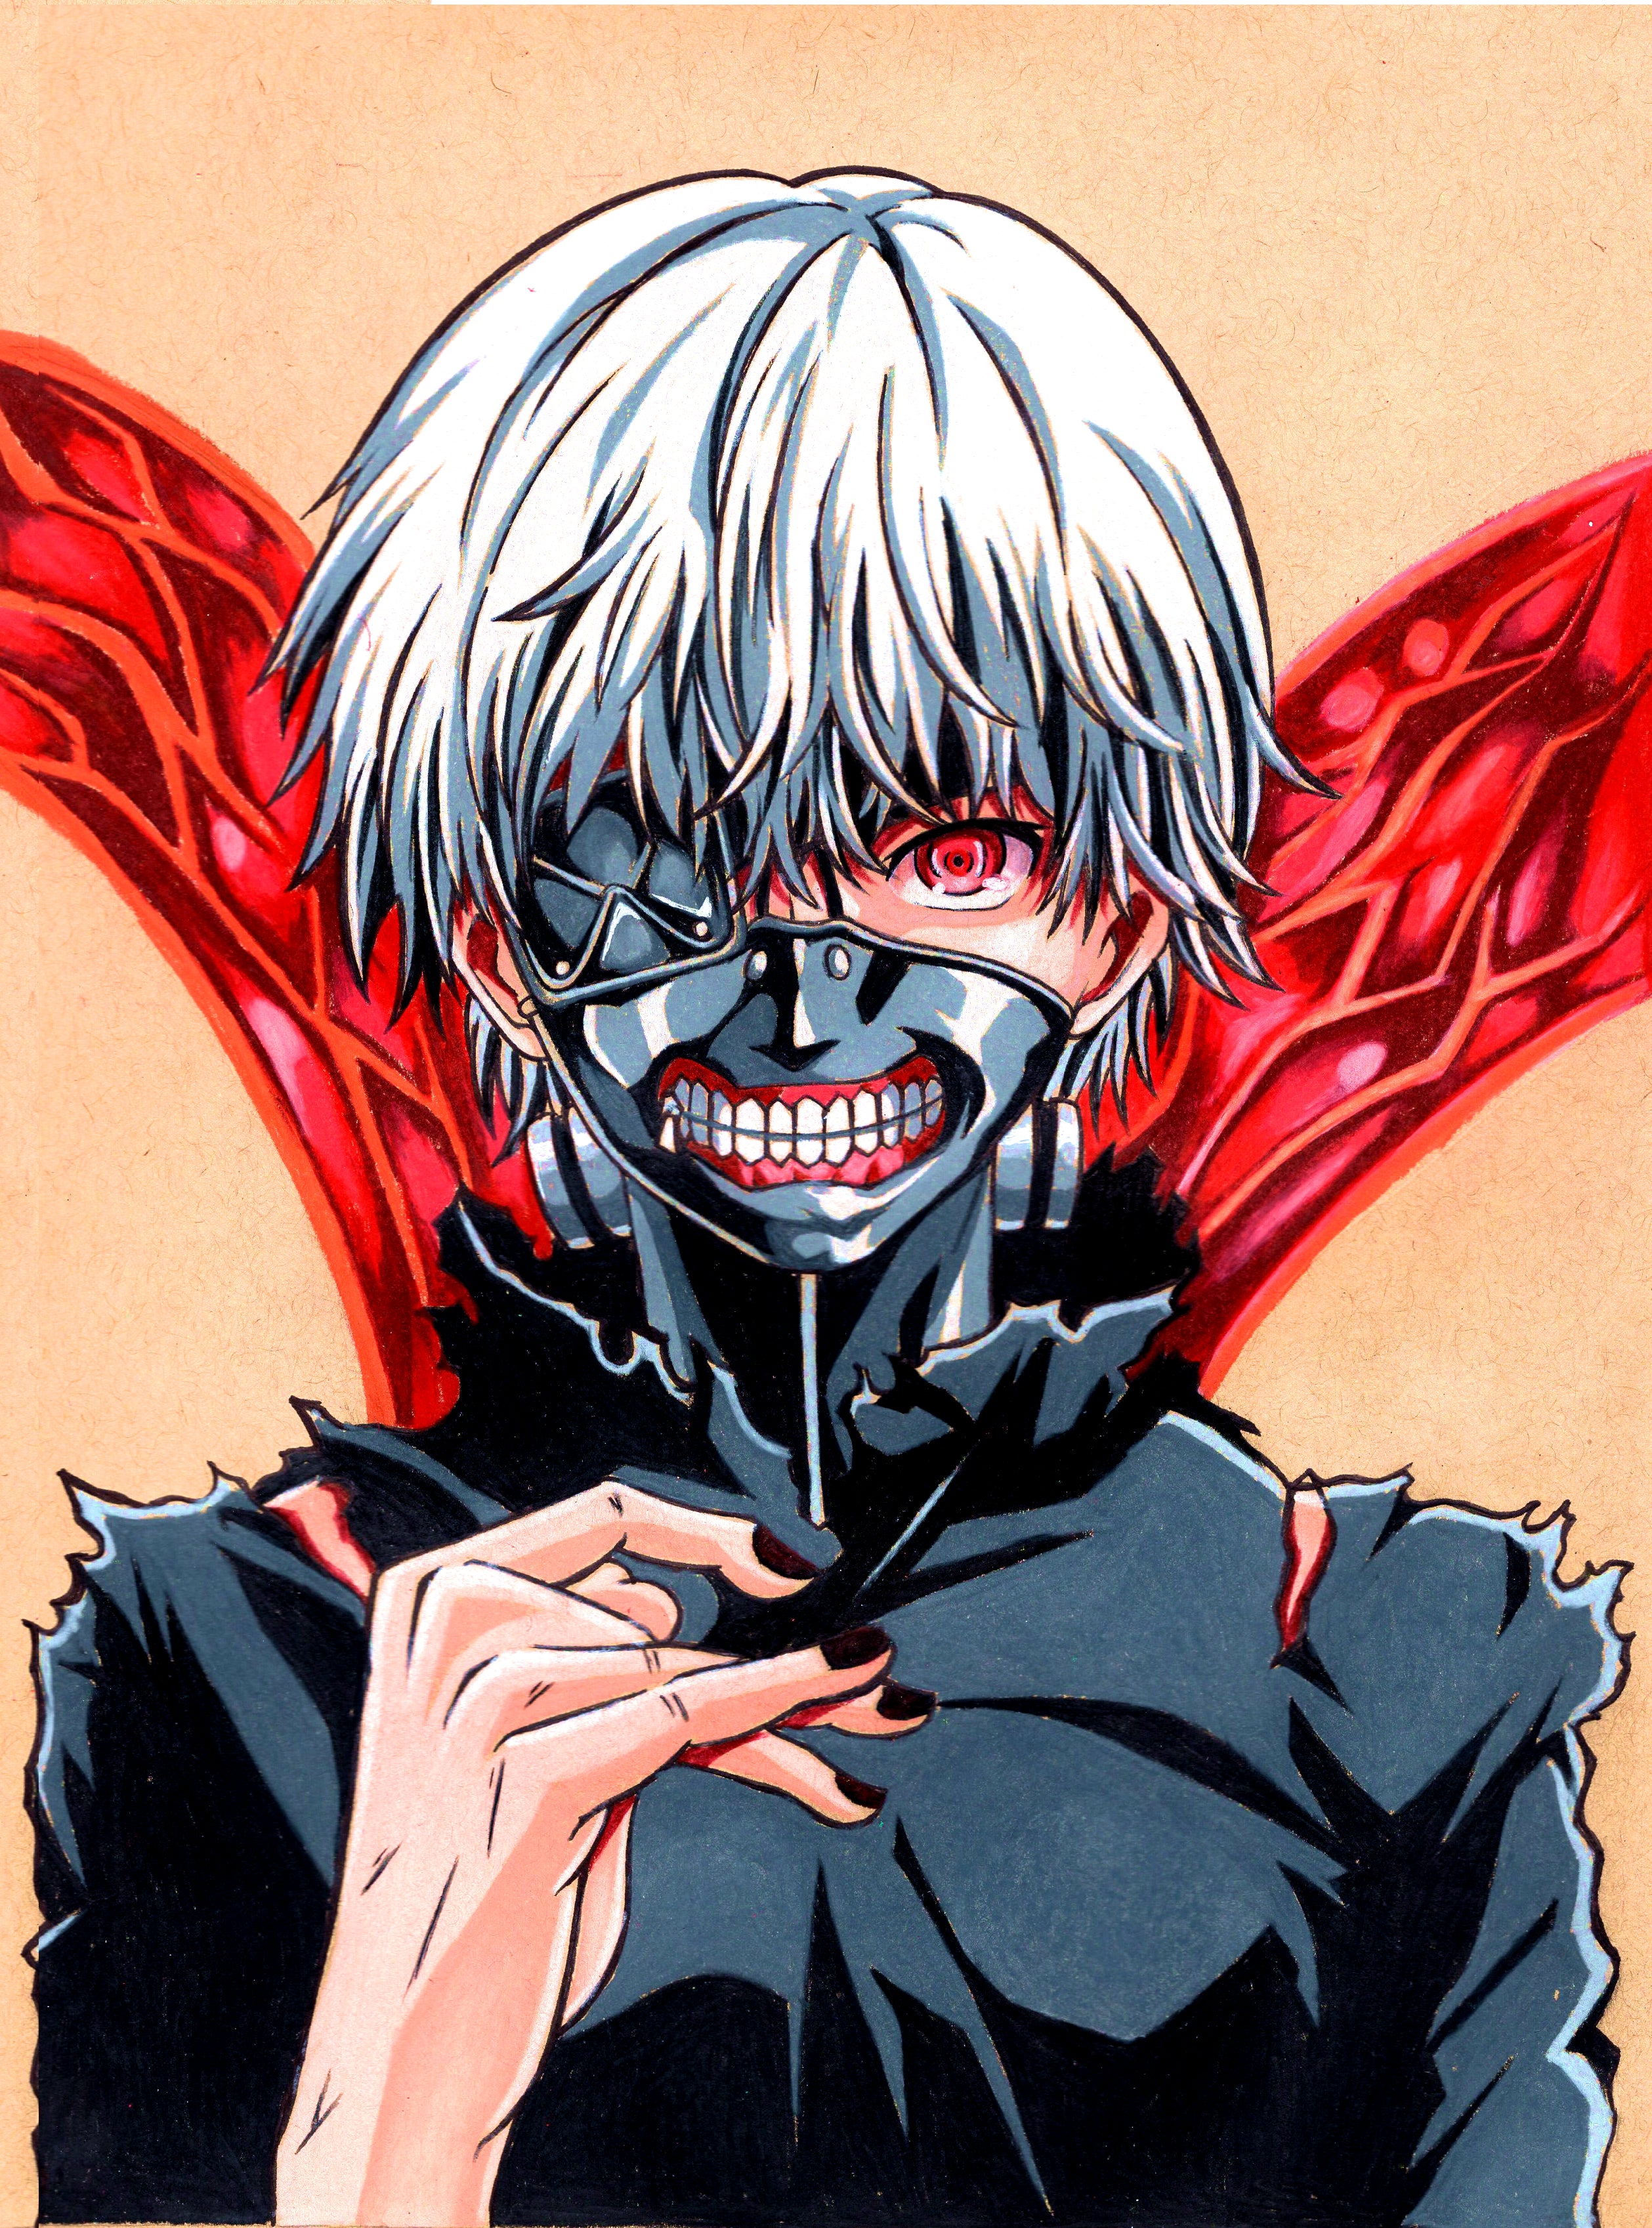 Tokyo Ghoul: Kaneki's Centipede Form Returns With a Twist in New Manga